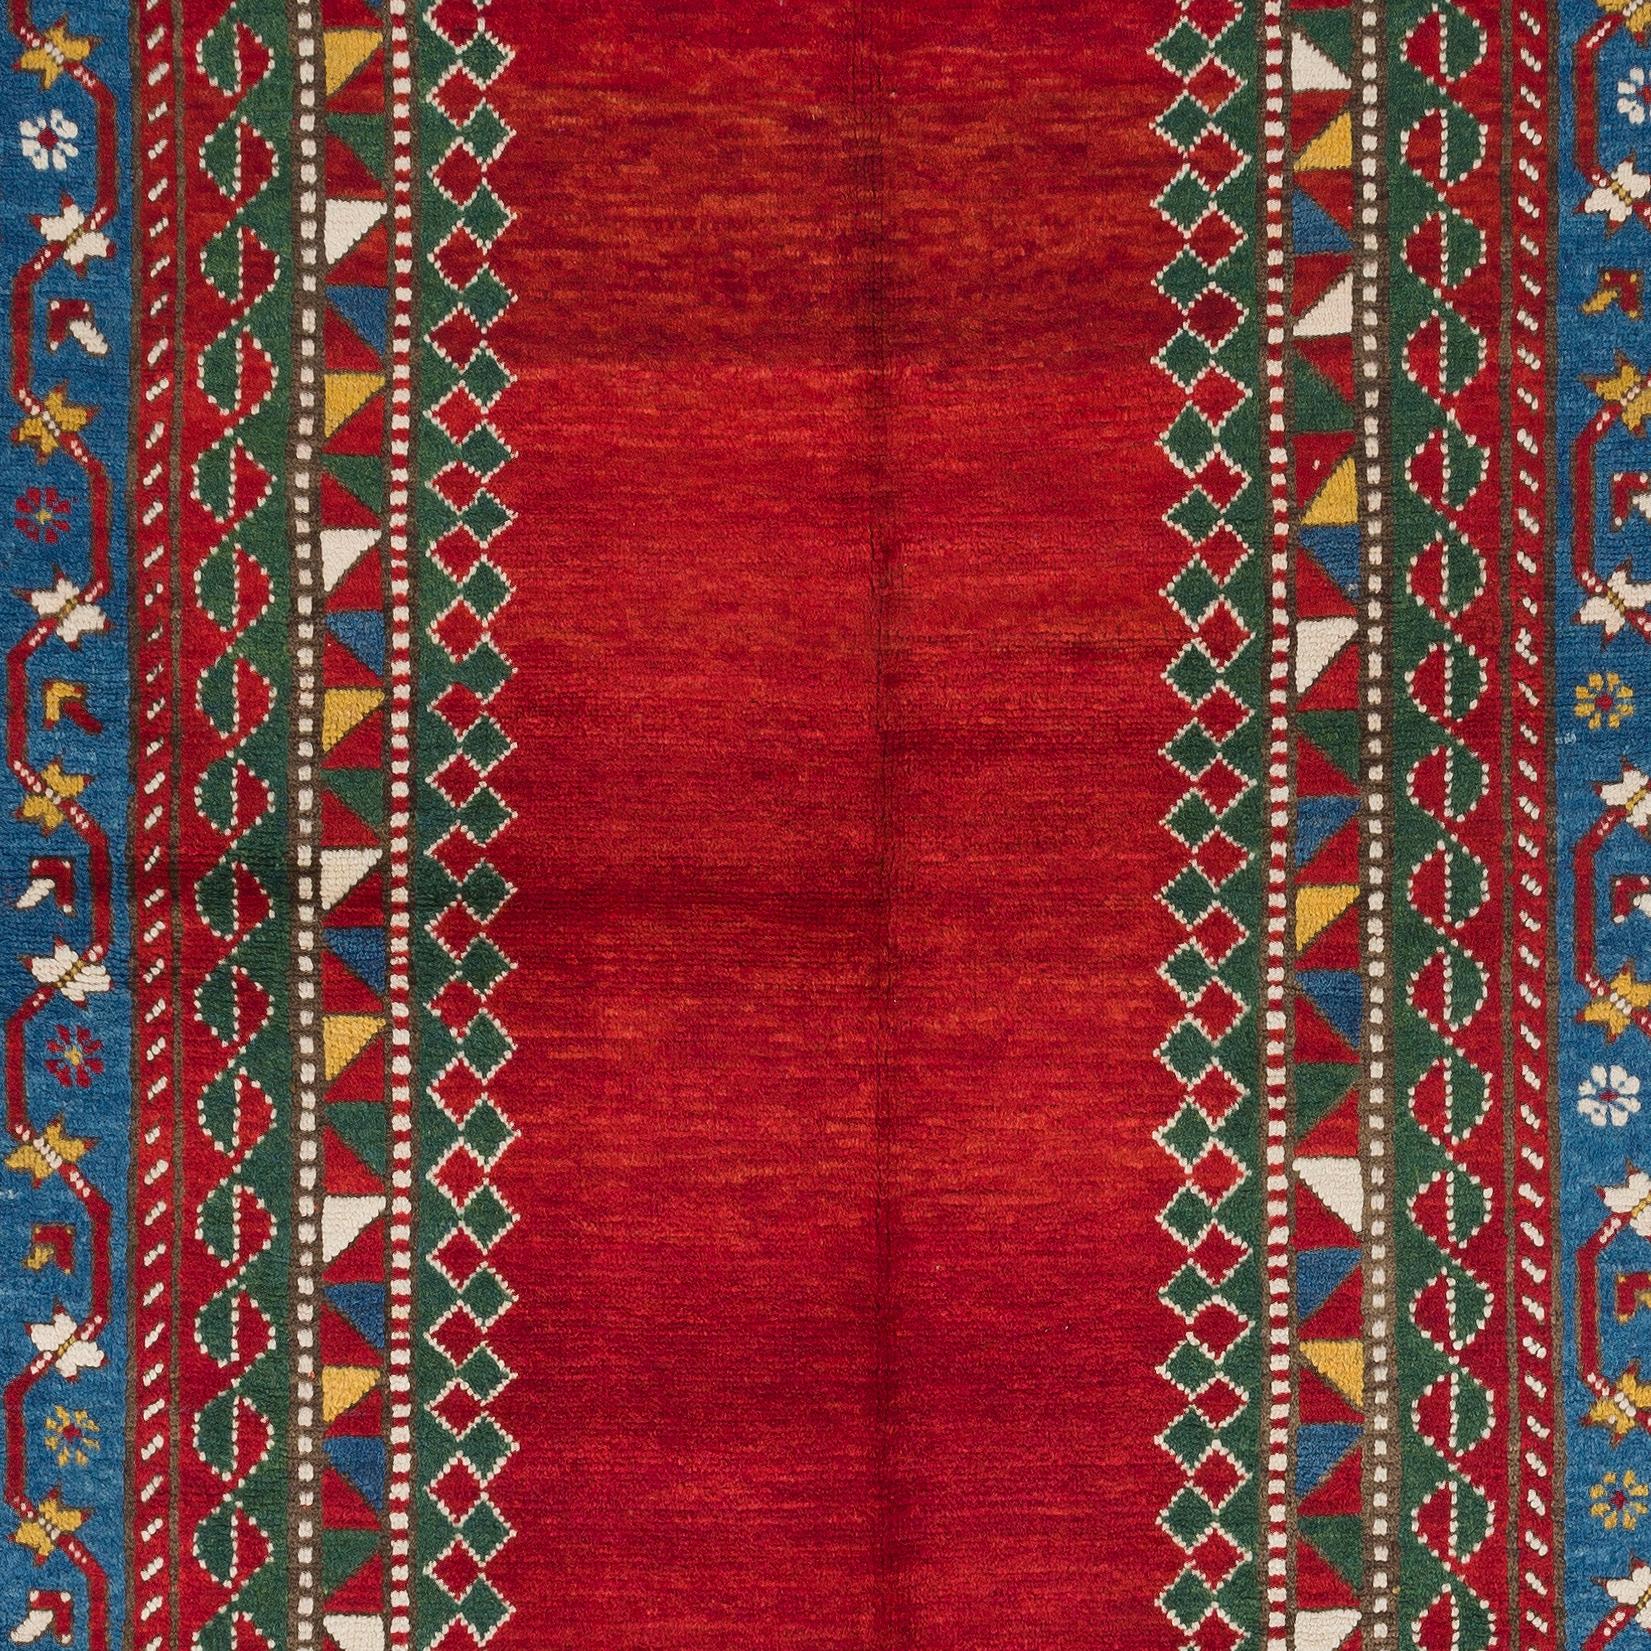 Hand-Knotted 5.9x9.3 ft Antique Caucasian Kazak Rug, Circa 1880, 100% Wool and Natural Dyes For Sale